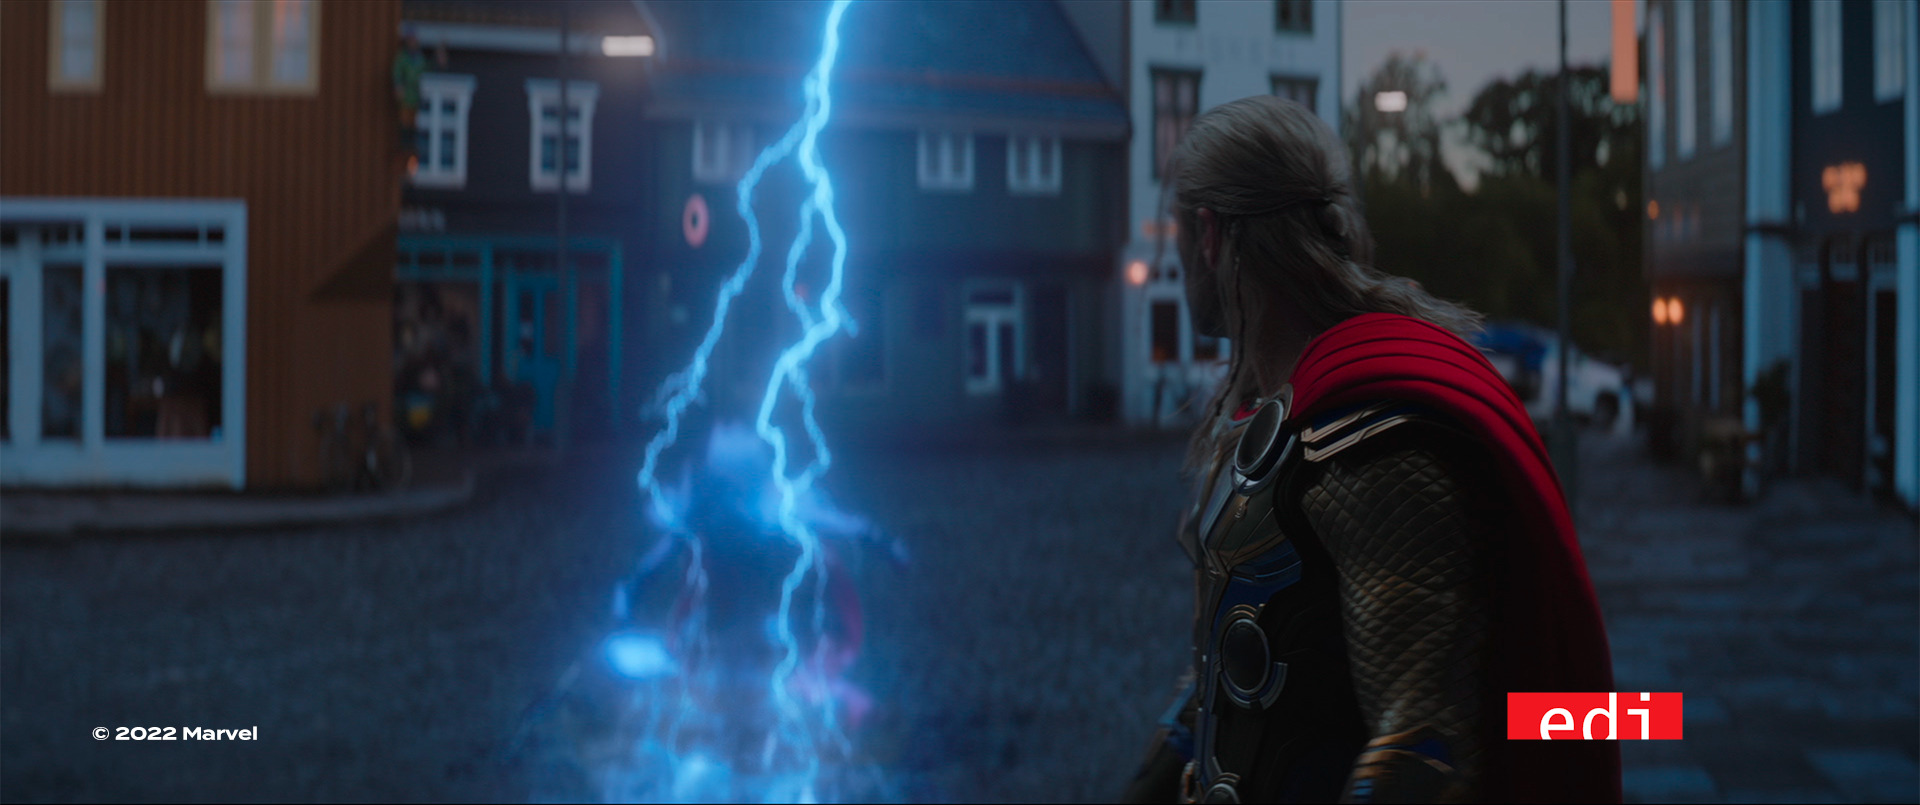 EDI signs the VFX of Thor: Love and Thunder